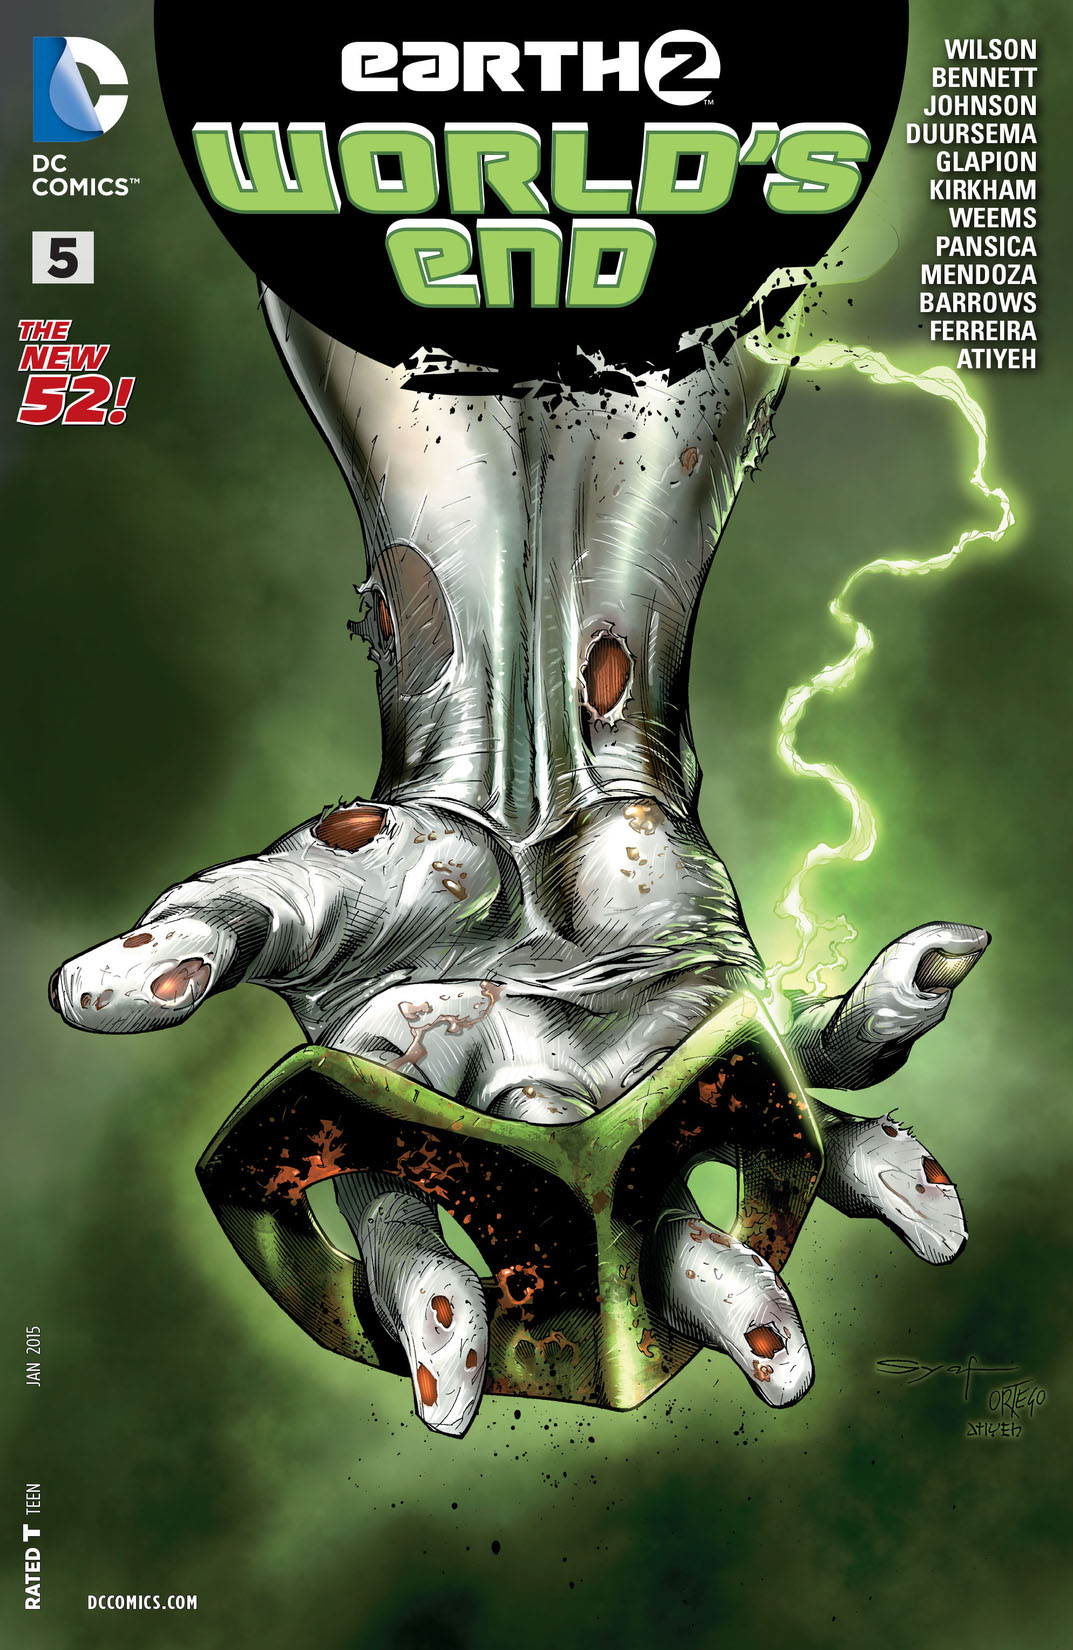 Earth 2: World's End #5 preview images